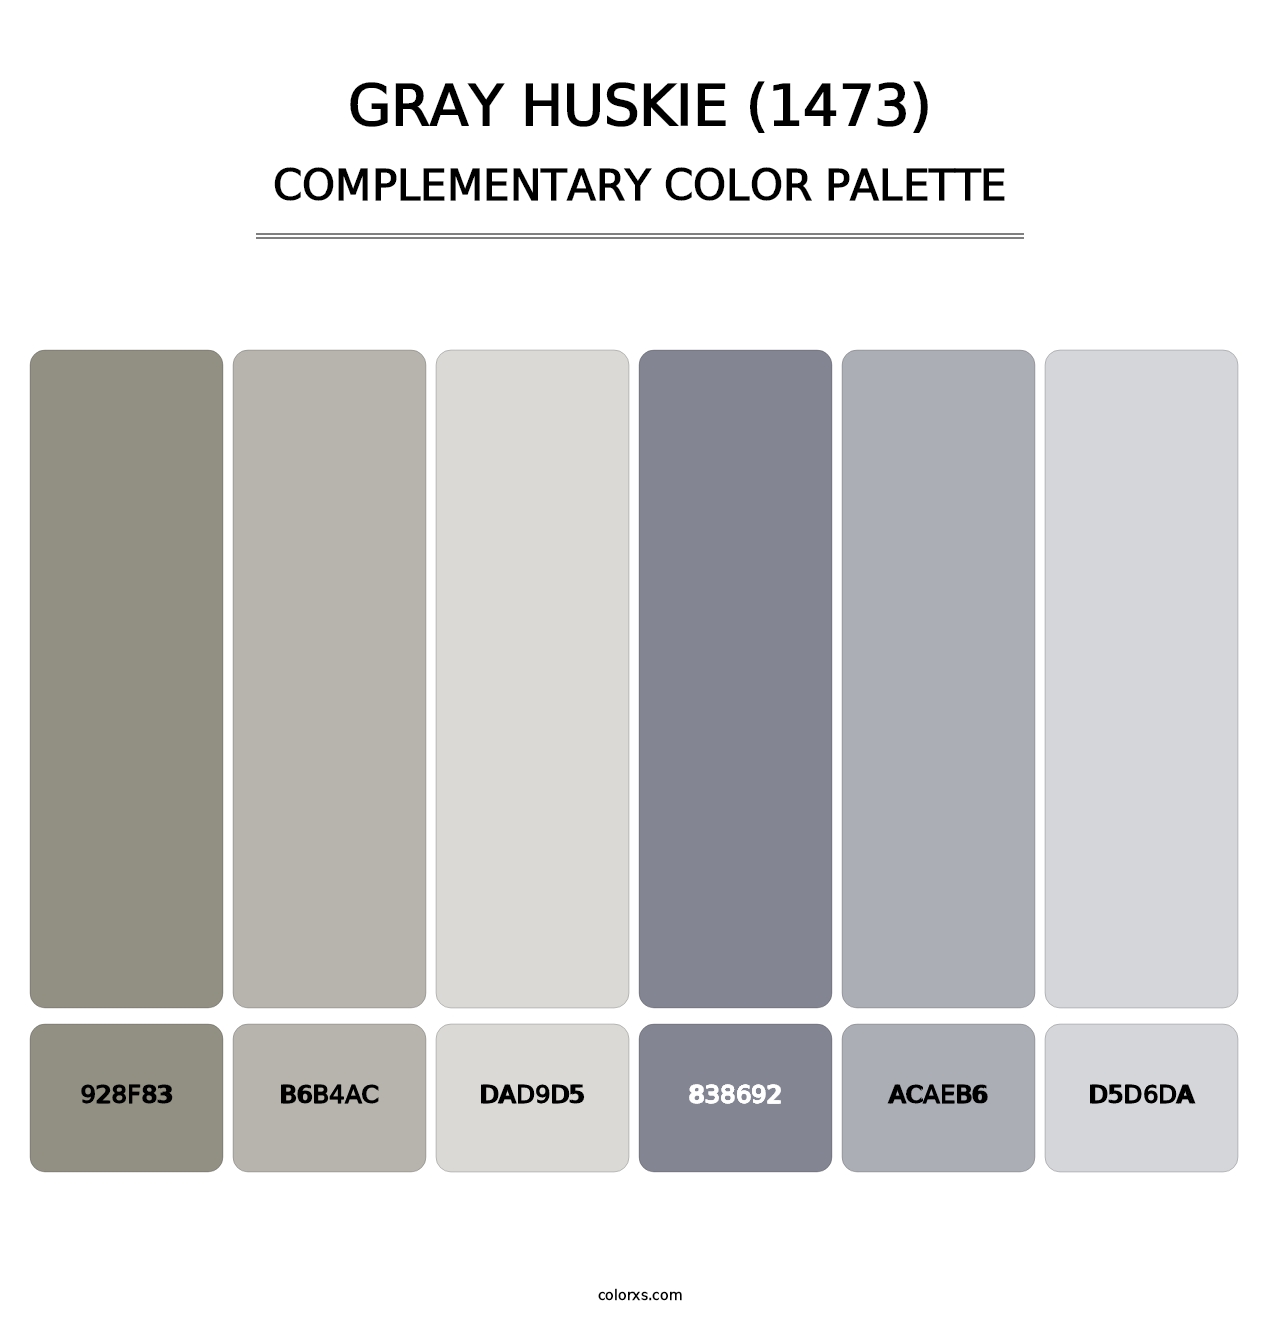 Gray Huskie (1473) - Complementary Color Palette